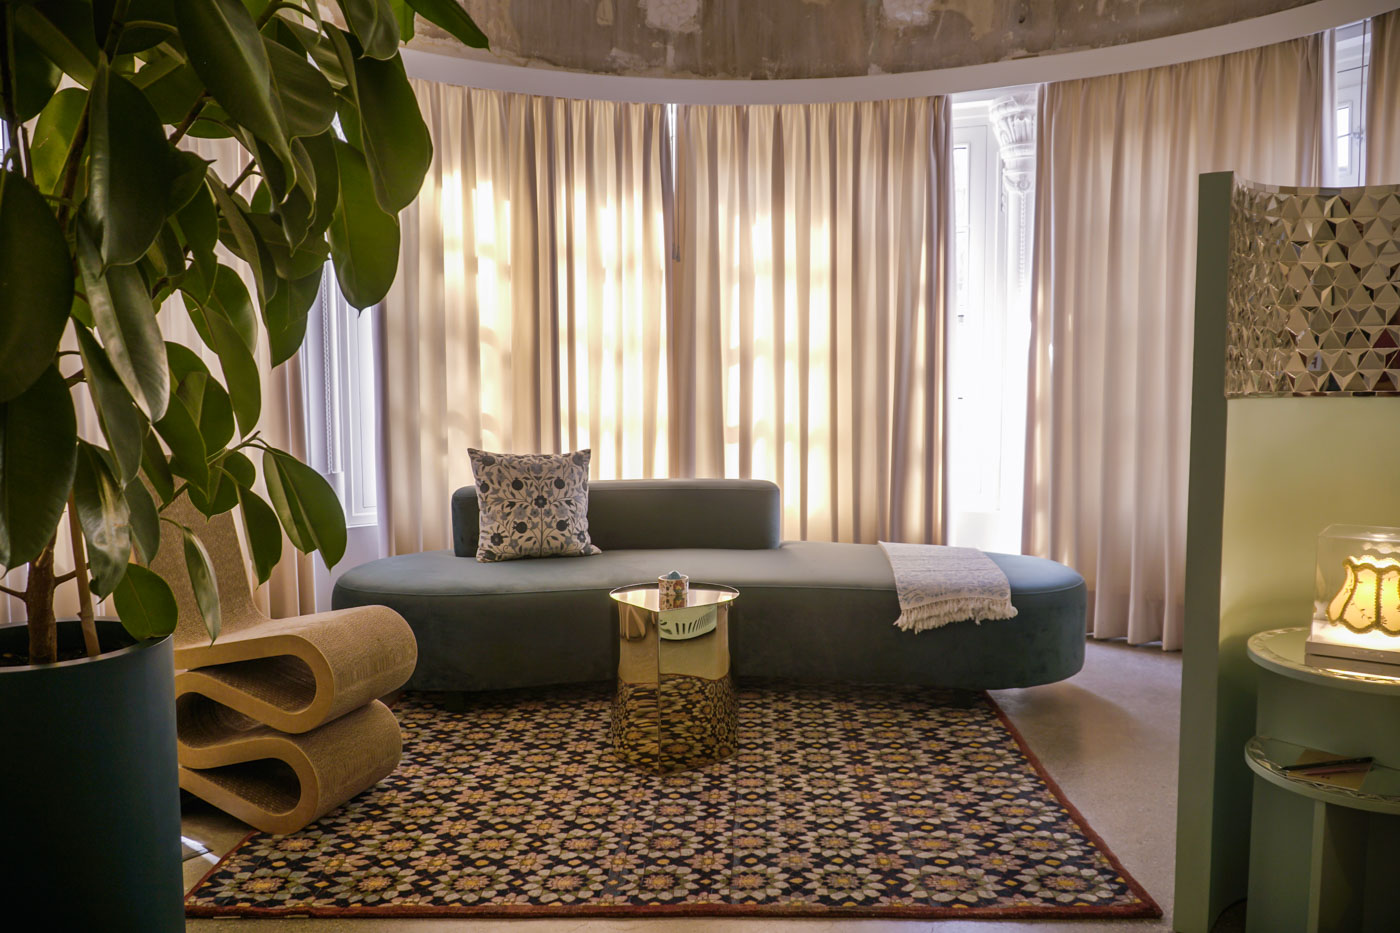 the room of Hanna Boutique Hotel showing a sofa and a modern seat in the room with closed curtains and a tall vase